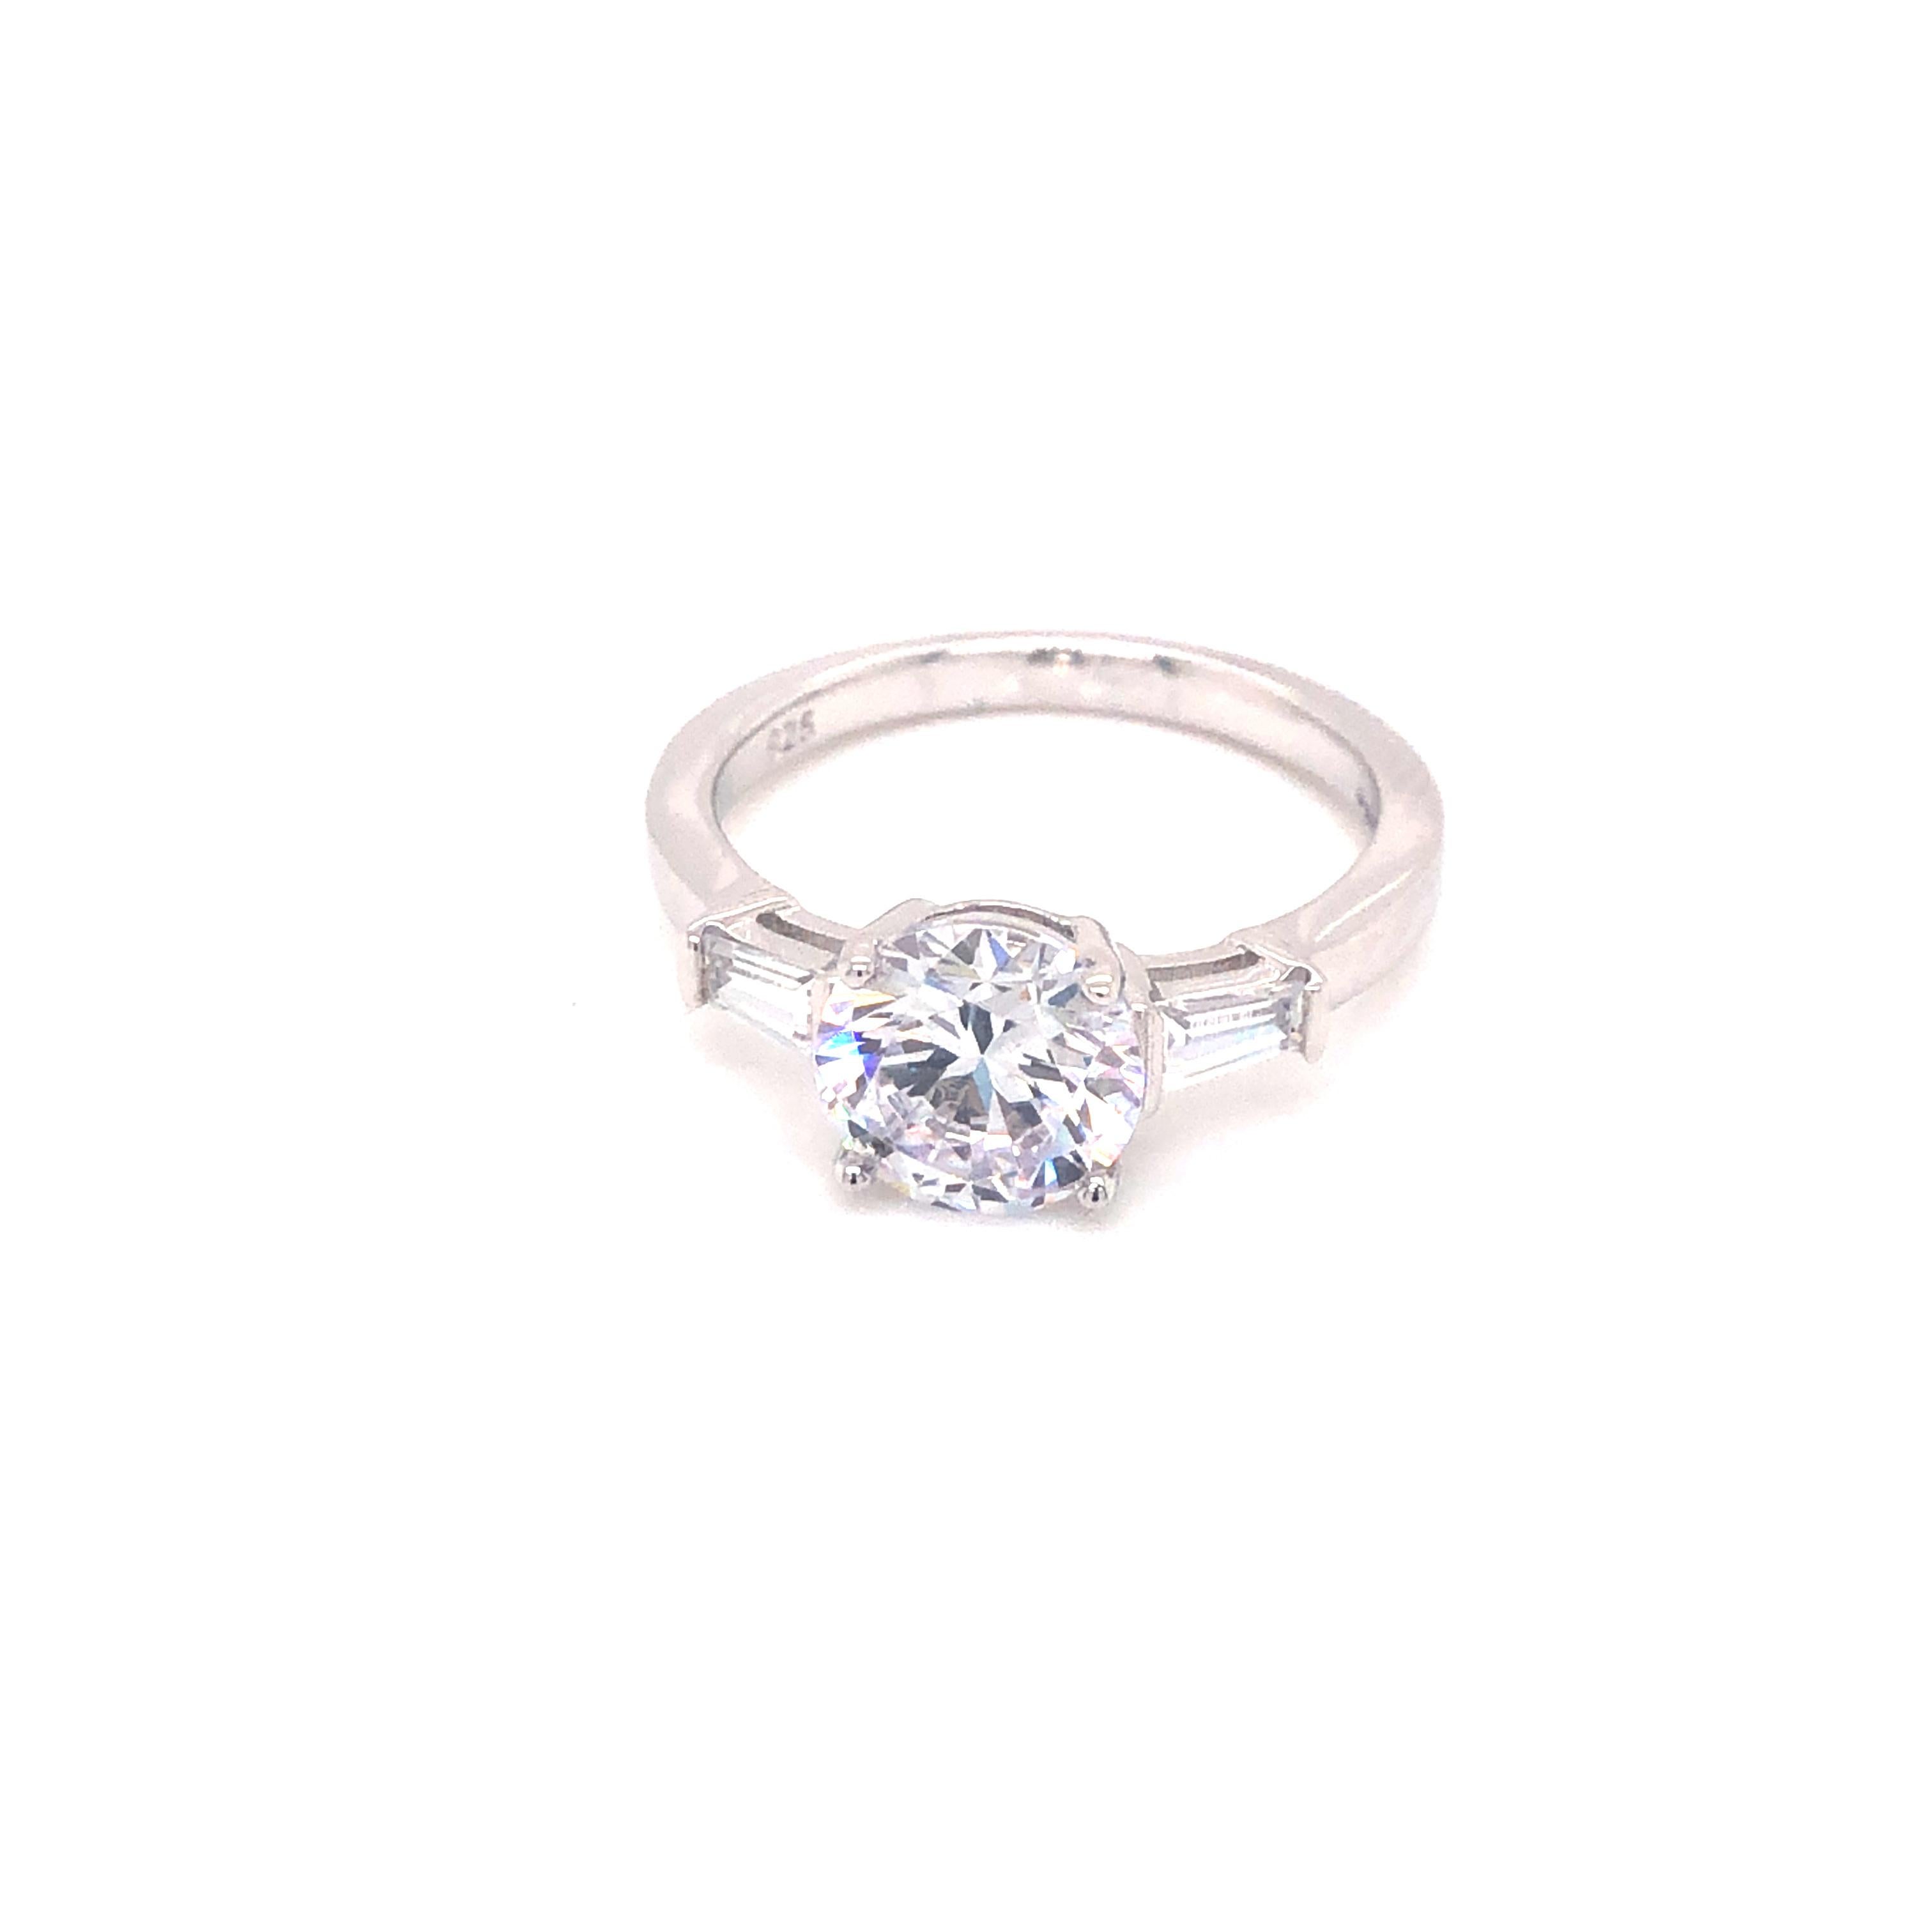 This elegant trilogy style ring features a central round brilliant cut measuring 2.69 carat cubic zirconia flanked by two matching tapered baguettes measuring 0.30 carat each. 

Composed of 925 sterling silver with a high gloss white rhodium